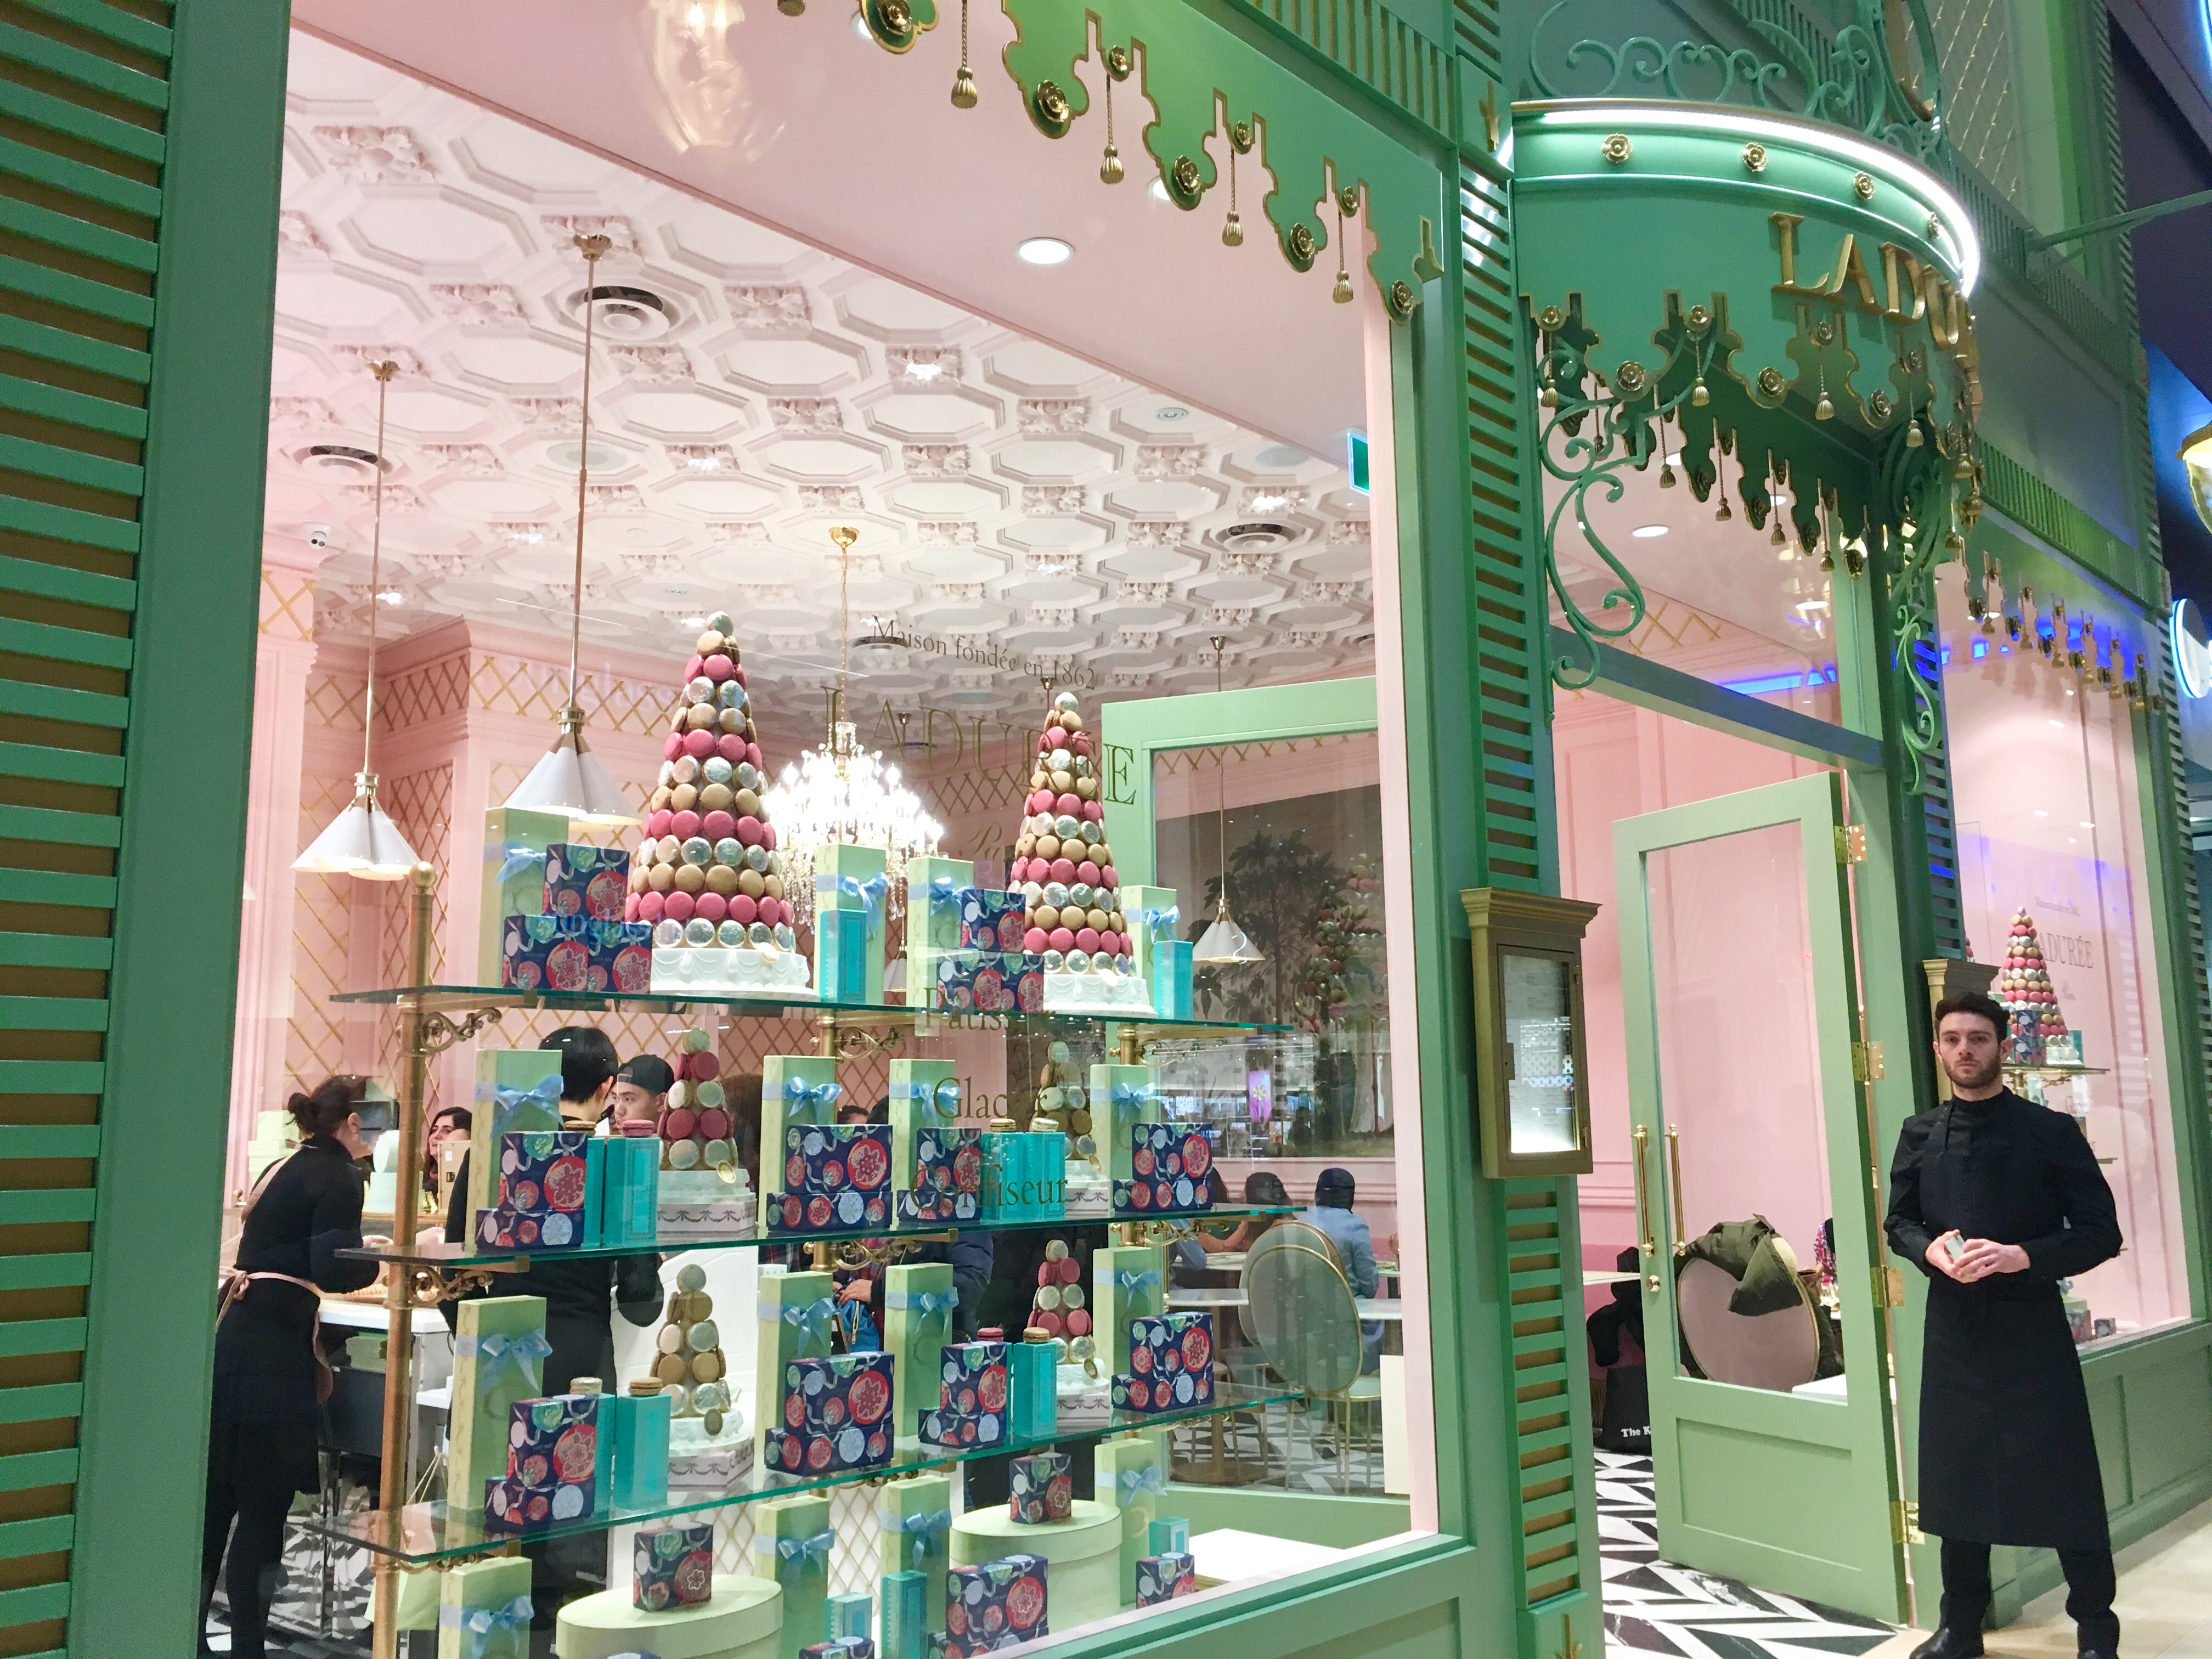 Ladurée Toronto store front on opening day